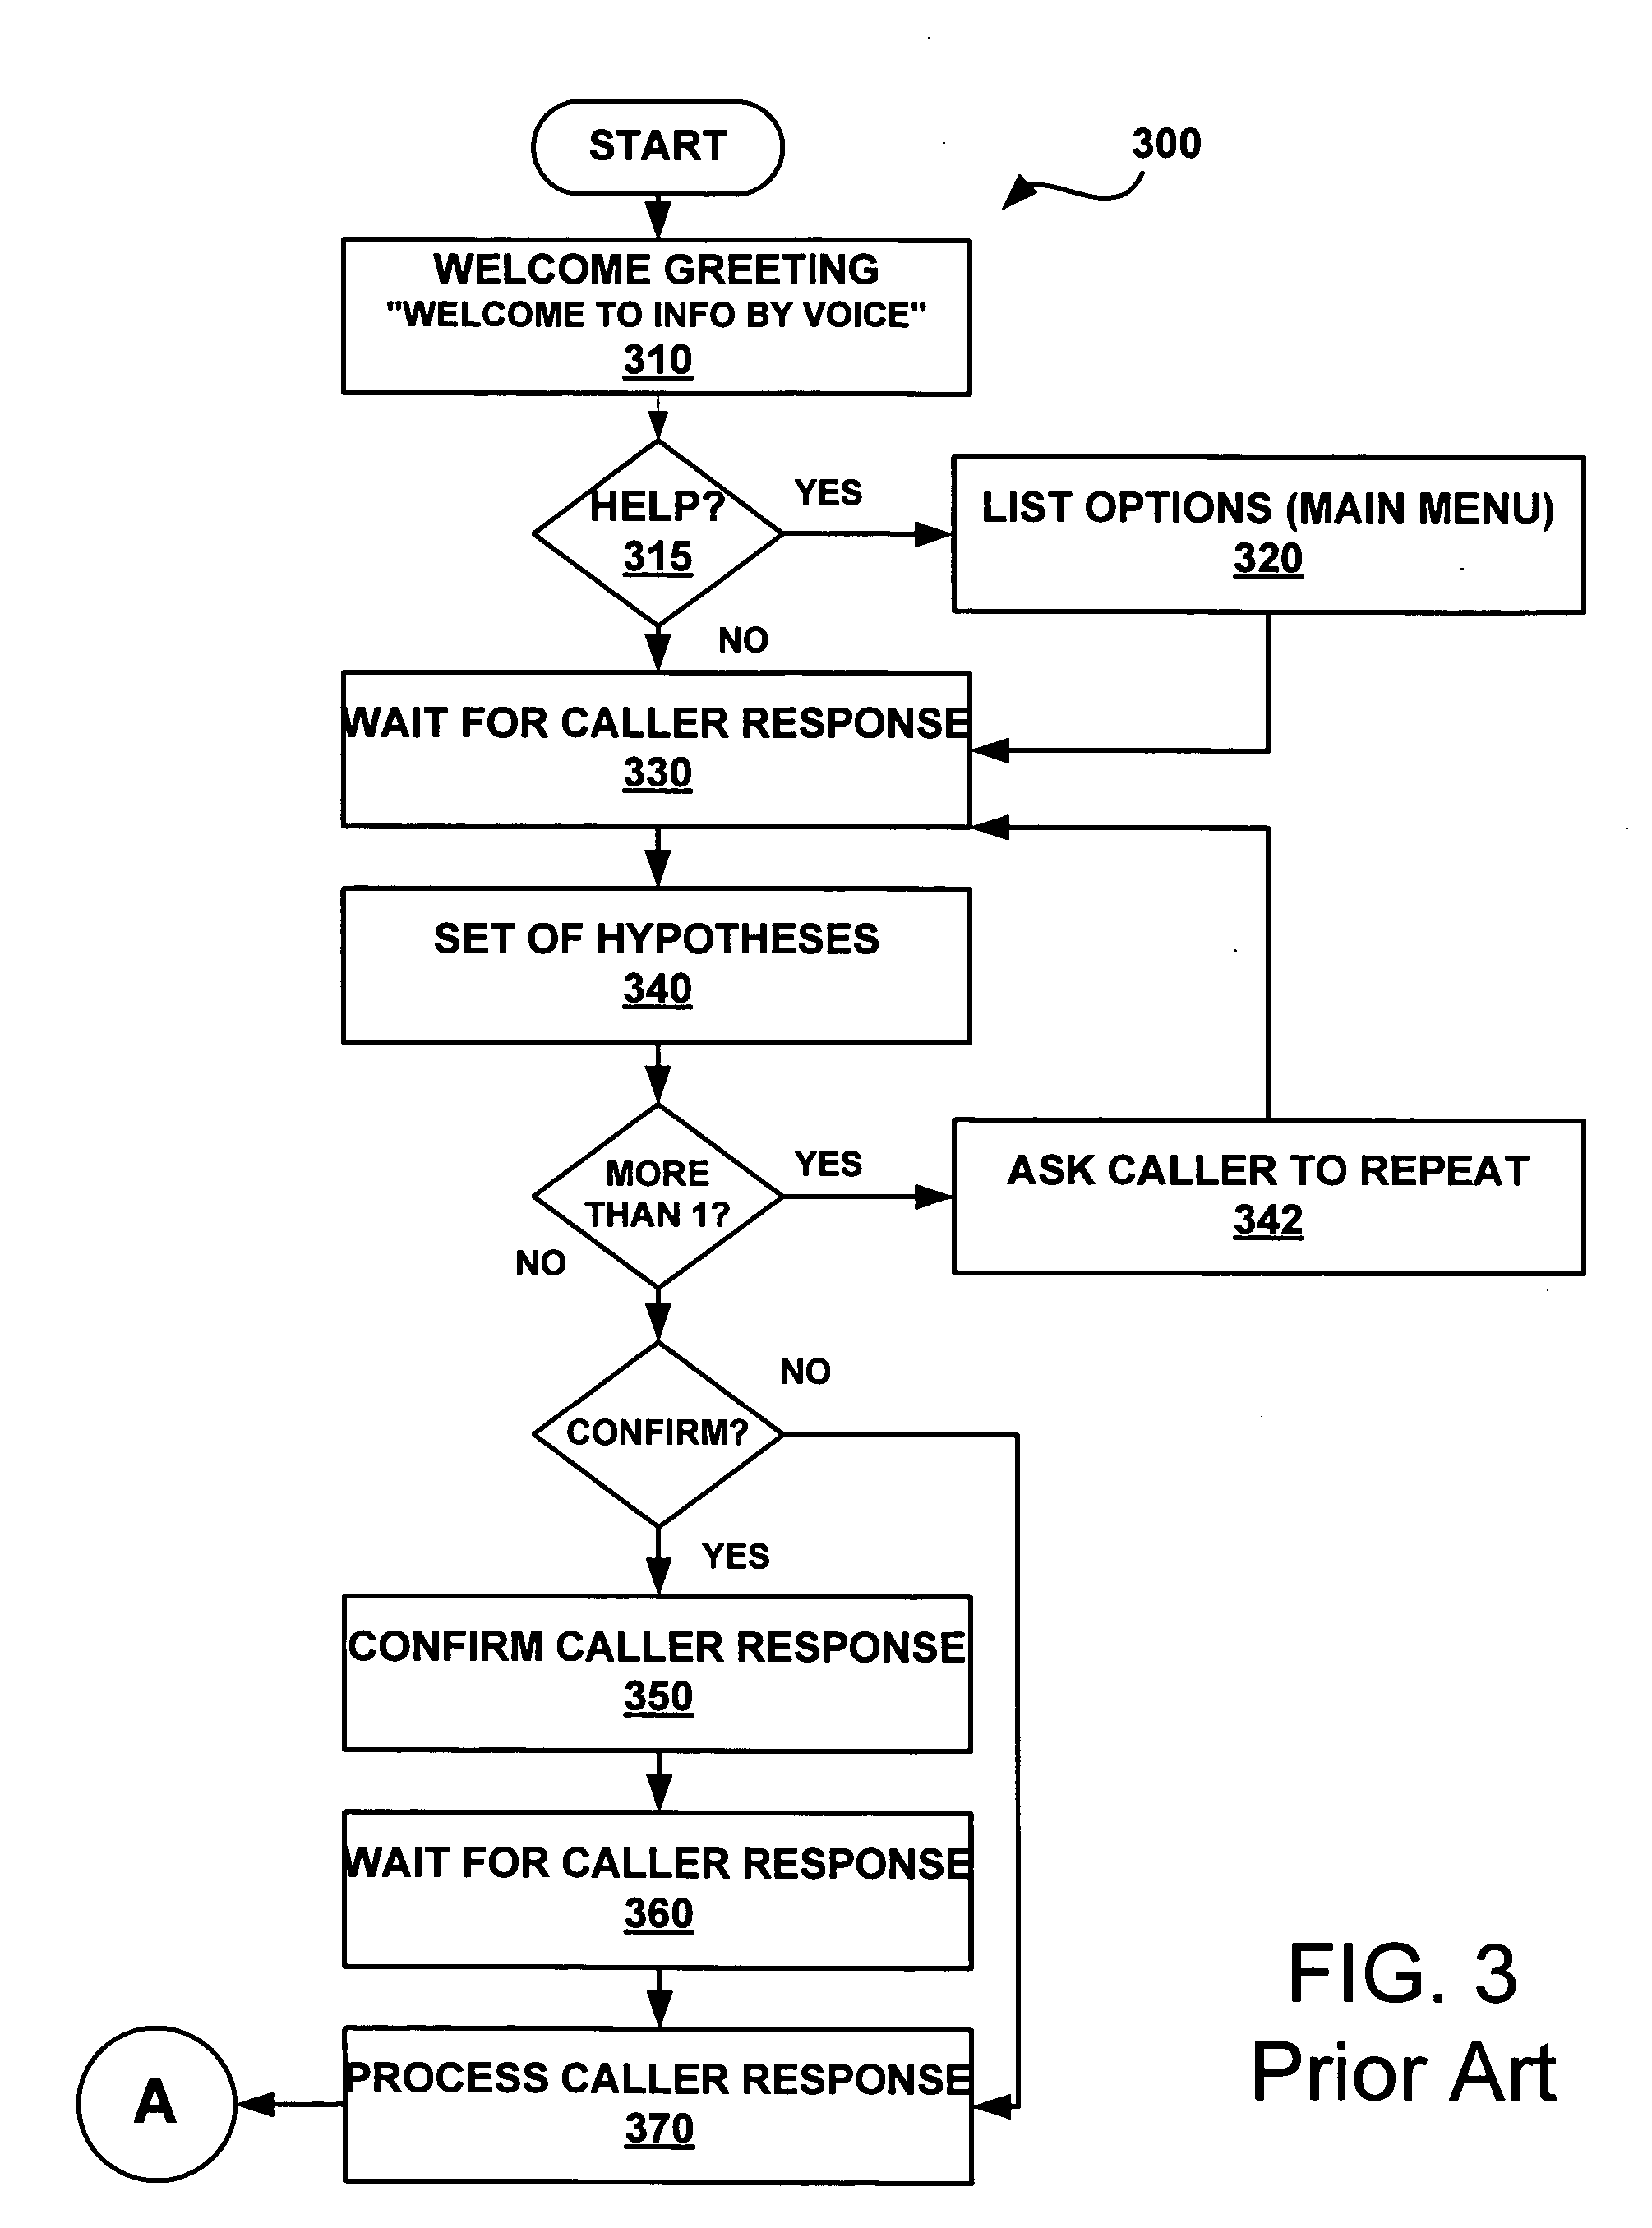 Multi-context conversational environment system and method